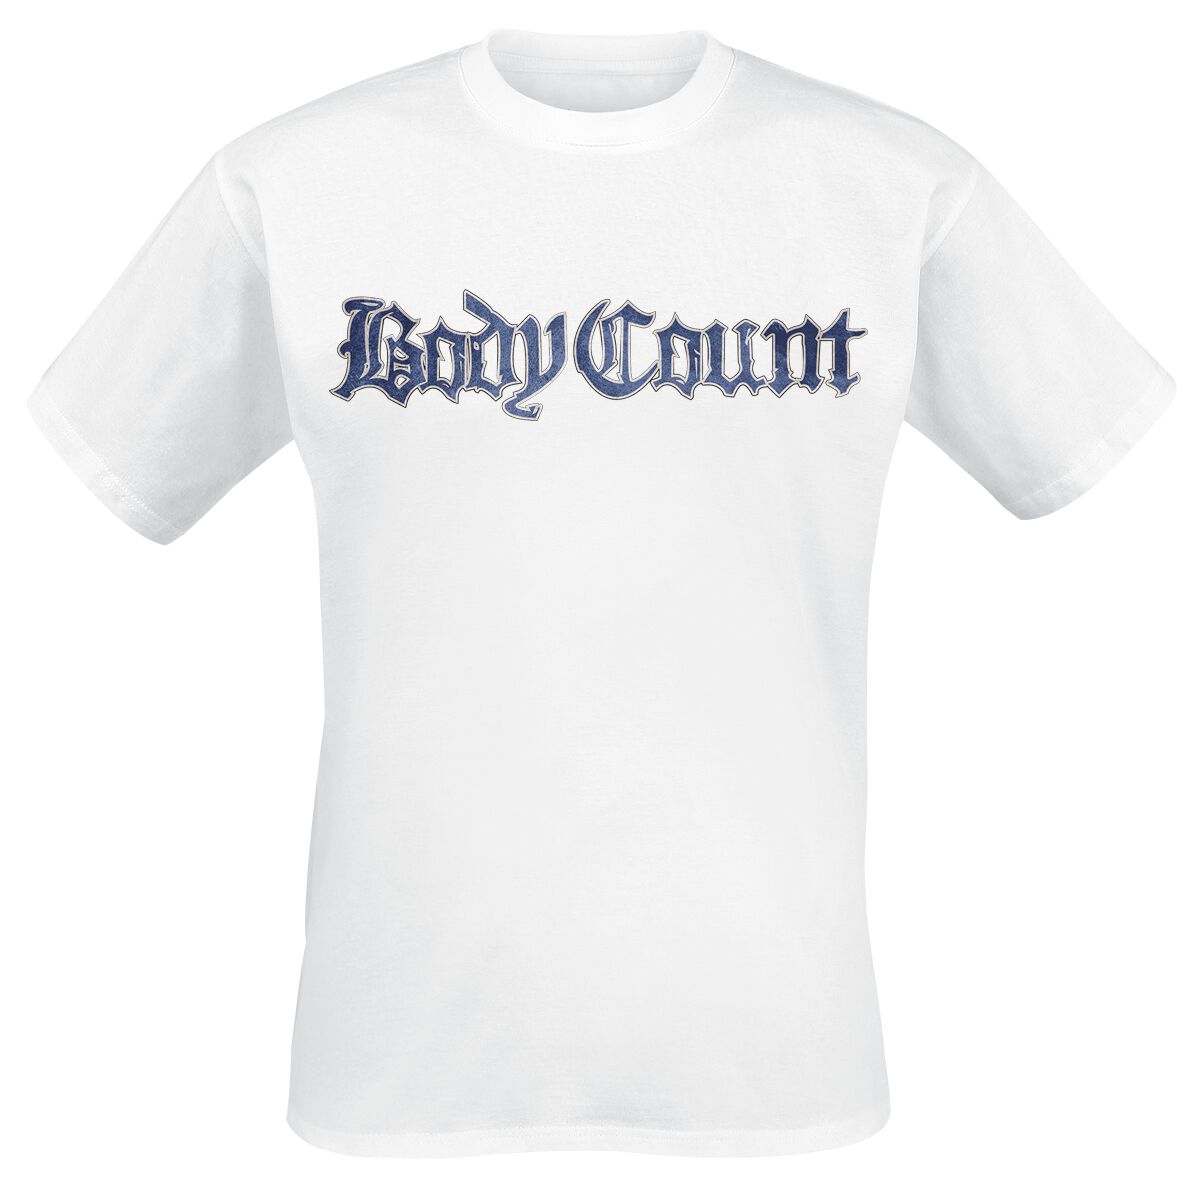 Body Count BANDPIC T-Shirt white